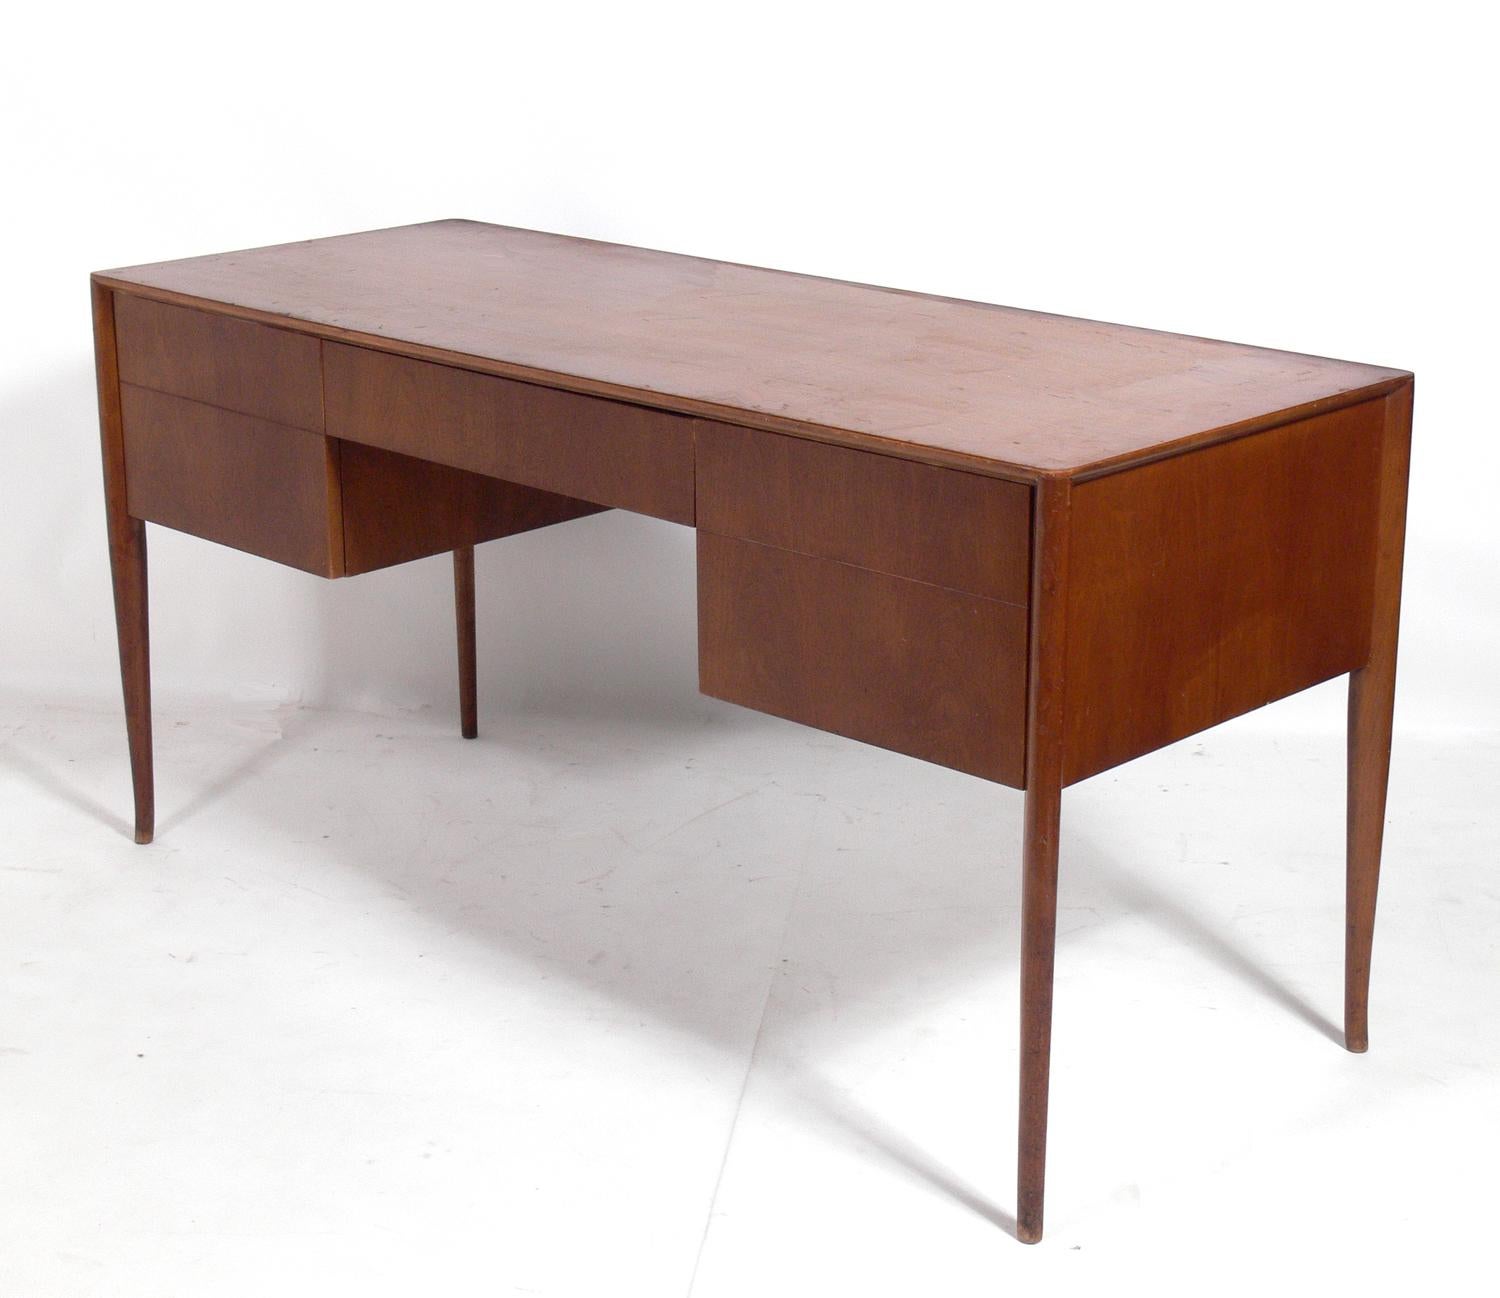 Curvaceous desk, designed by T.H. Robsjohn-Gibbings for Widdicomb, American, circa 1950s. This desk is currently being refinished and can be completed in your choice of finish color.